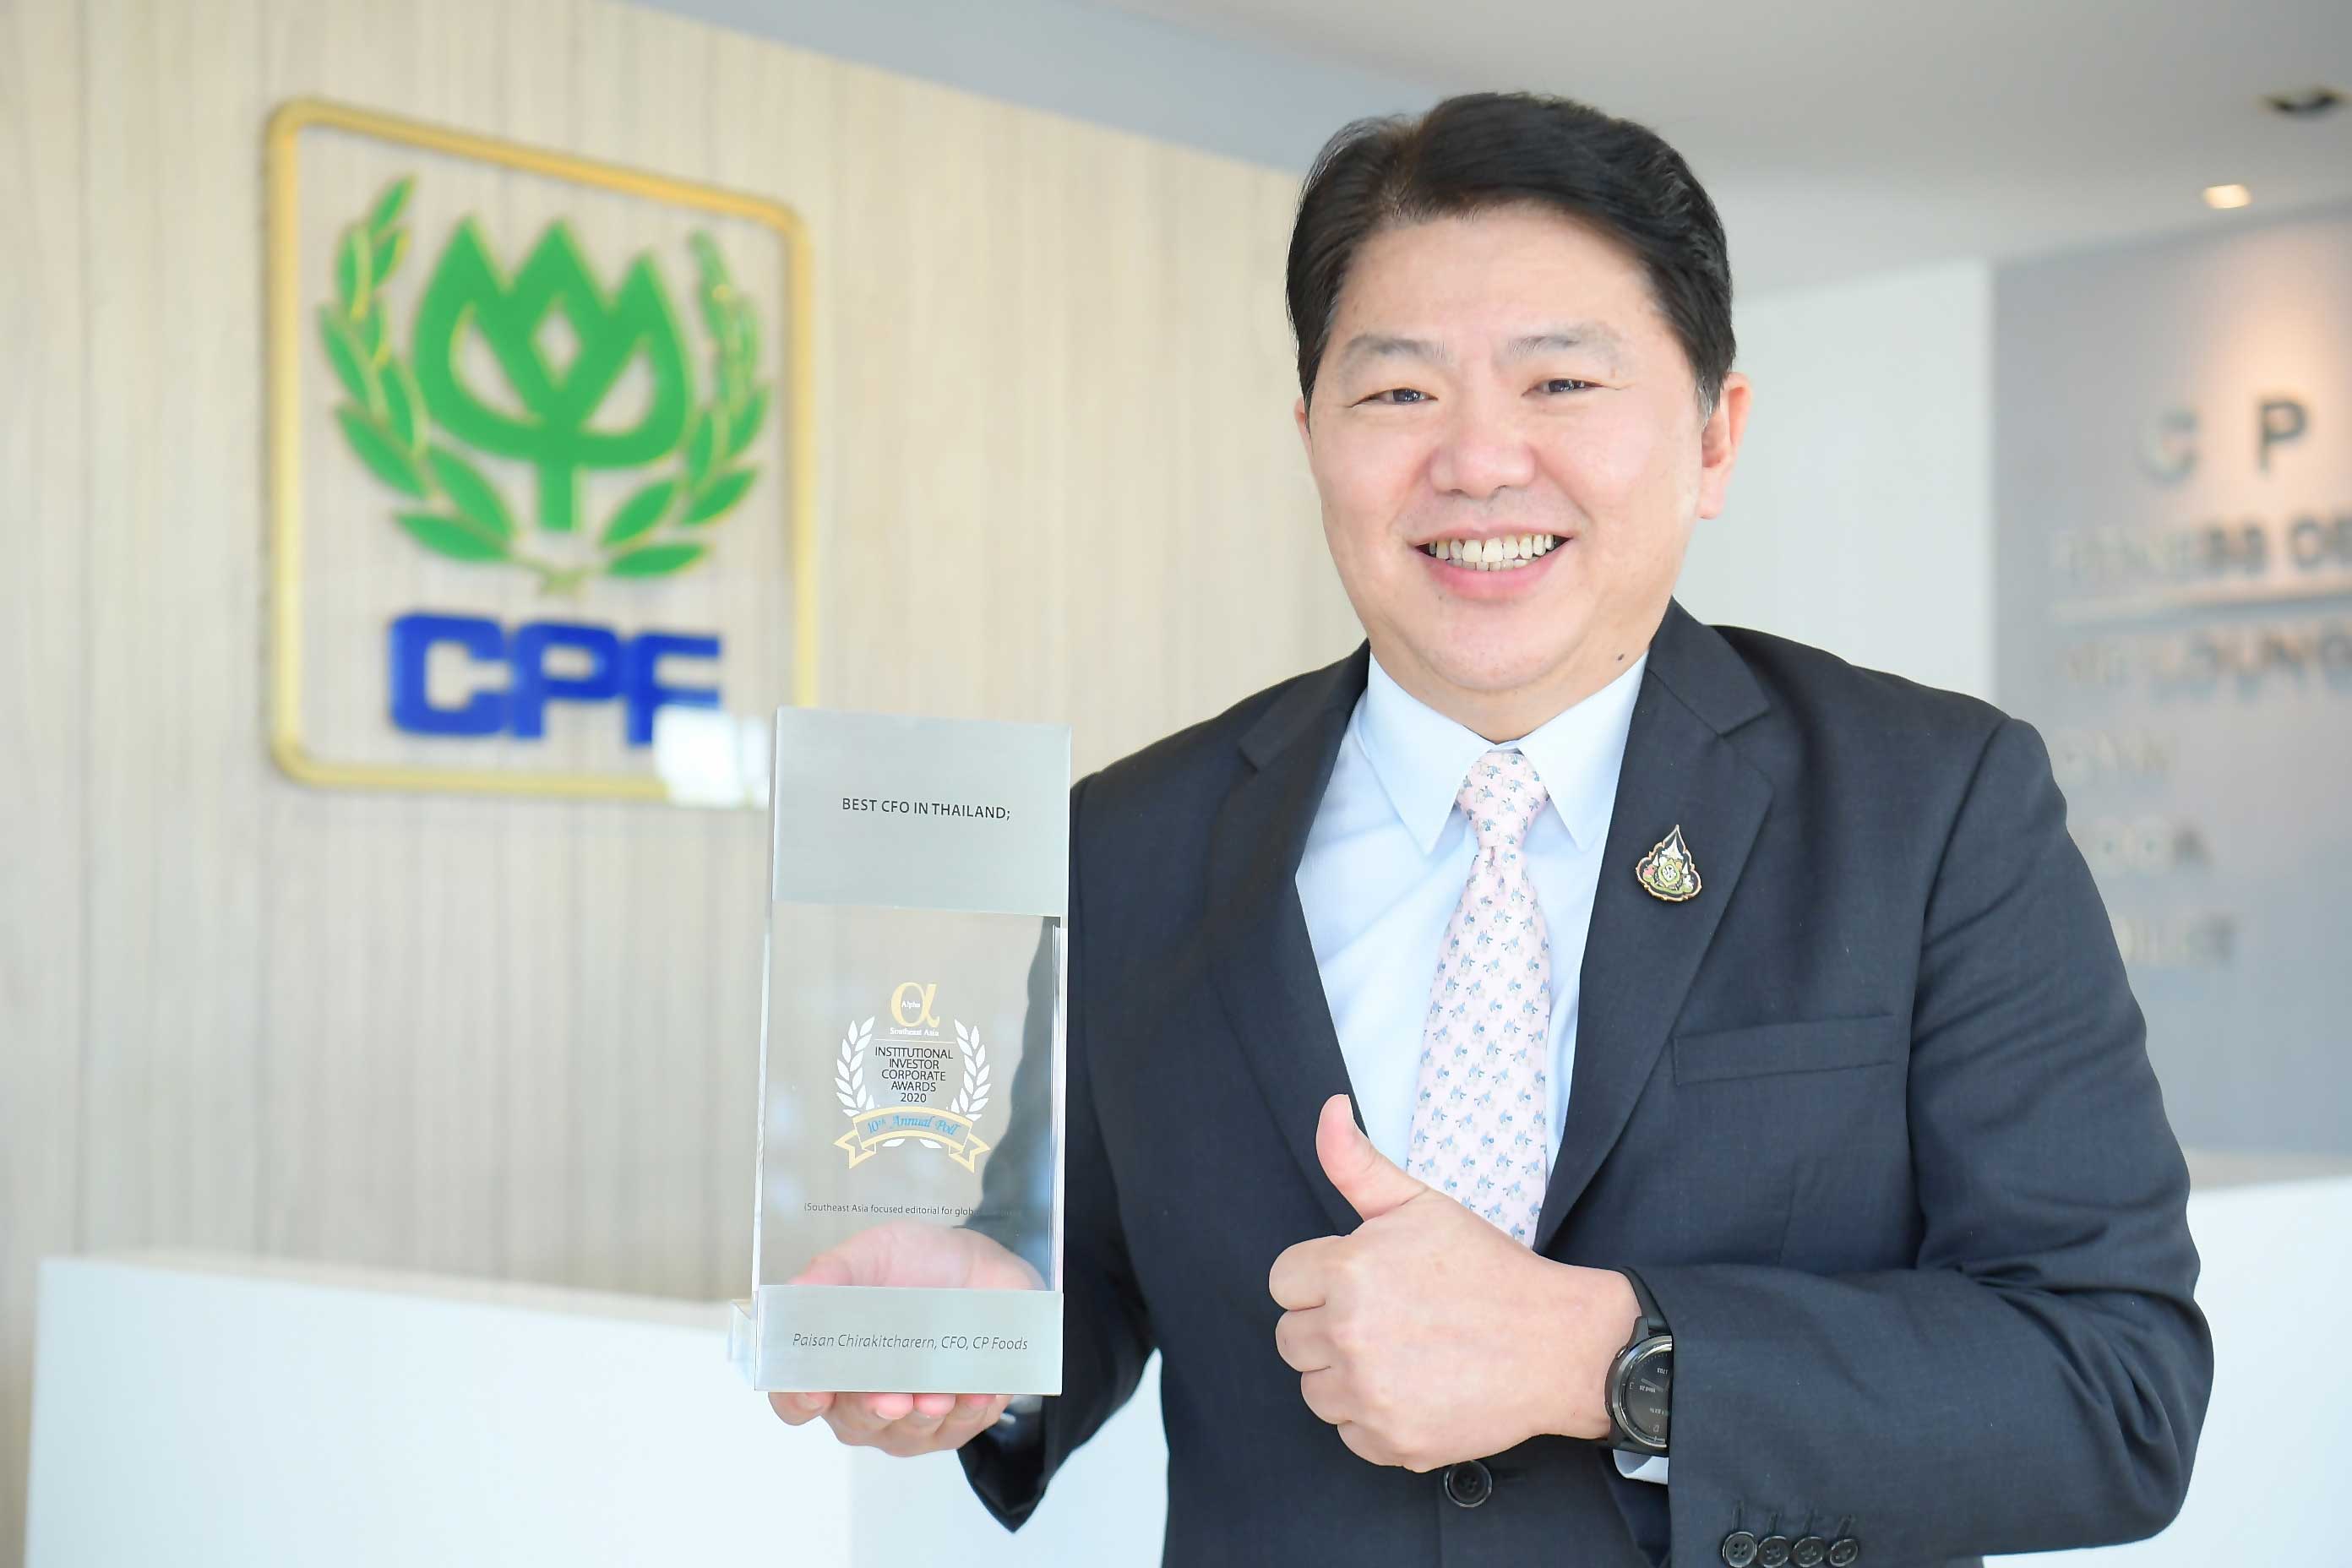 CPF wins "Best CFO in Thailand 2020" Award from Alpha Southeast Asia Magazine